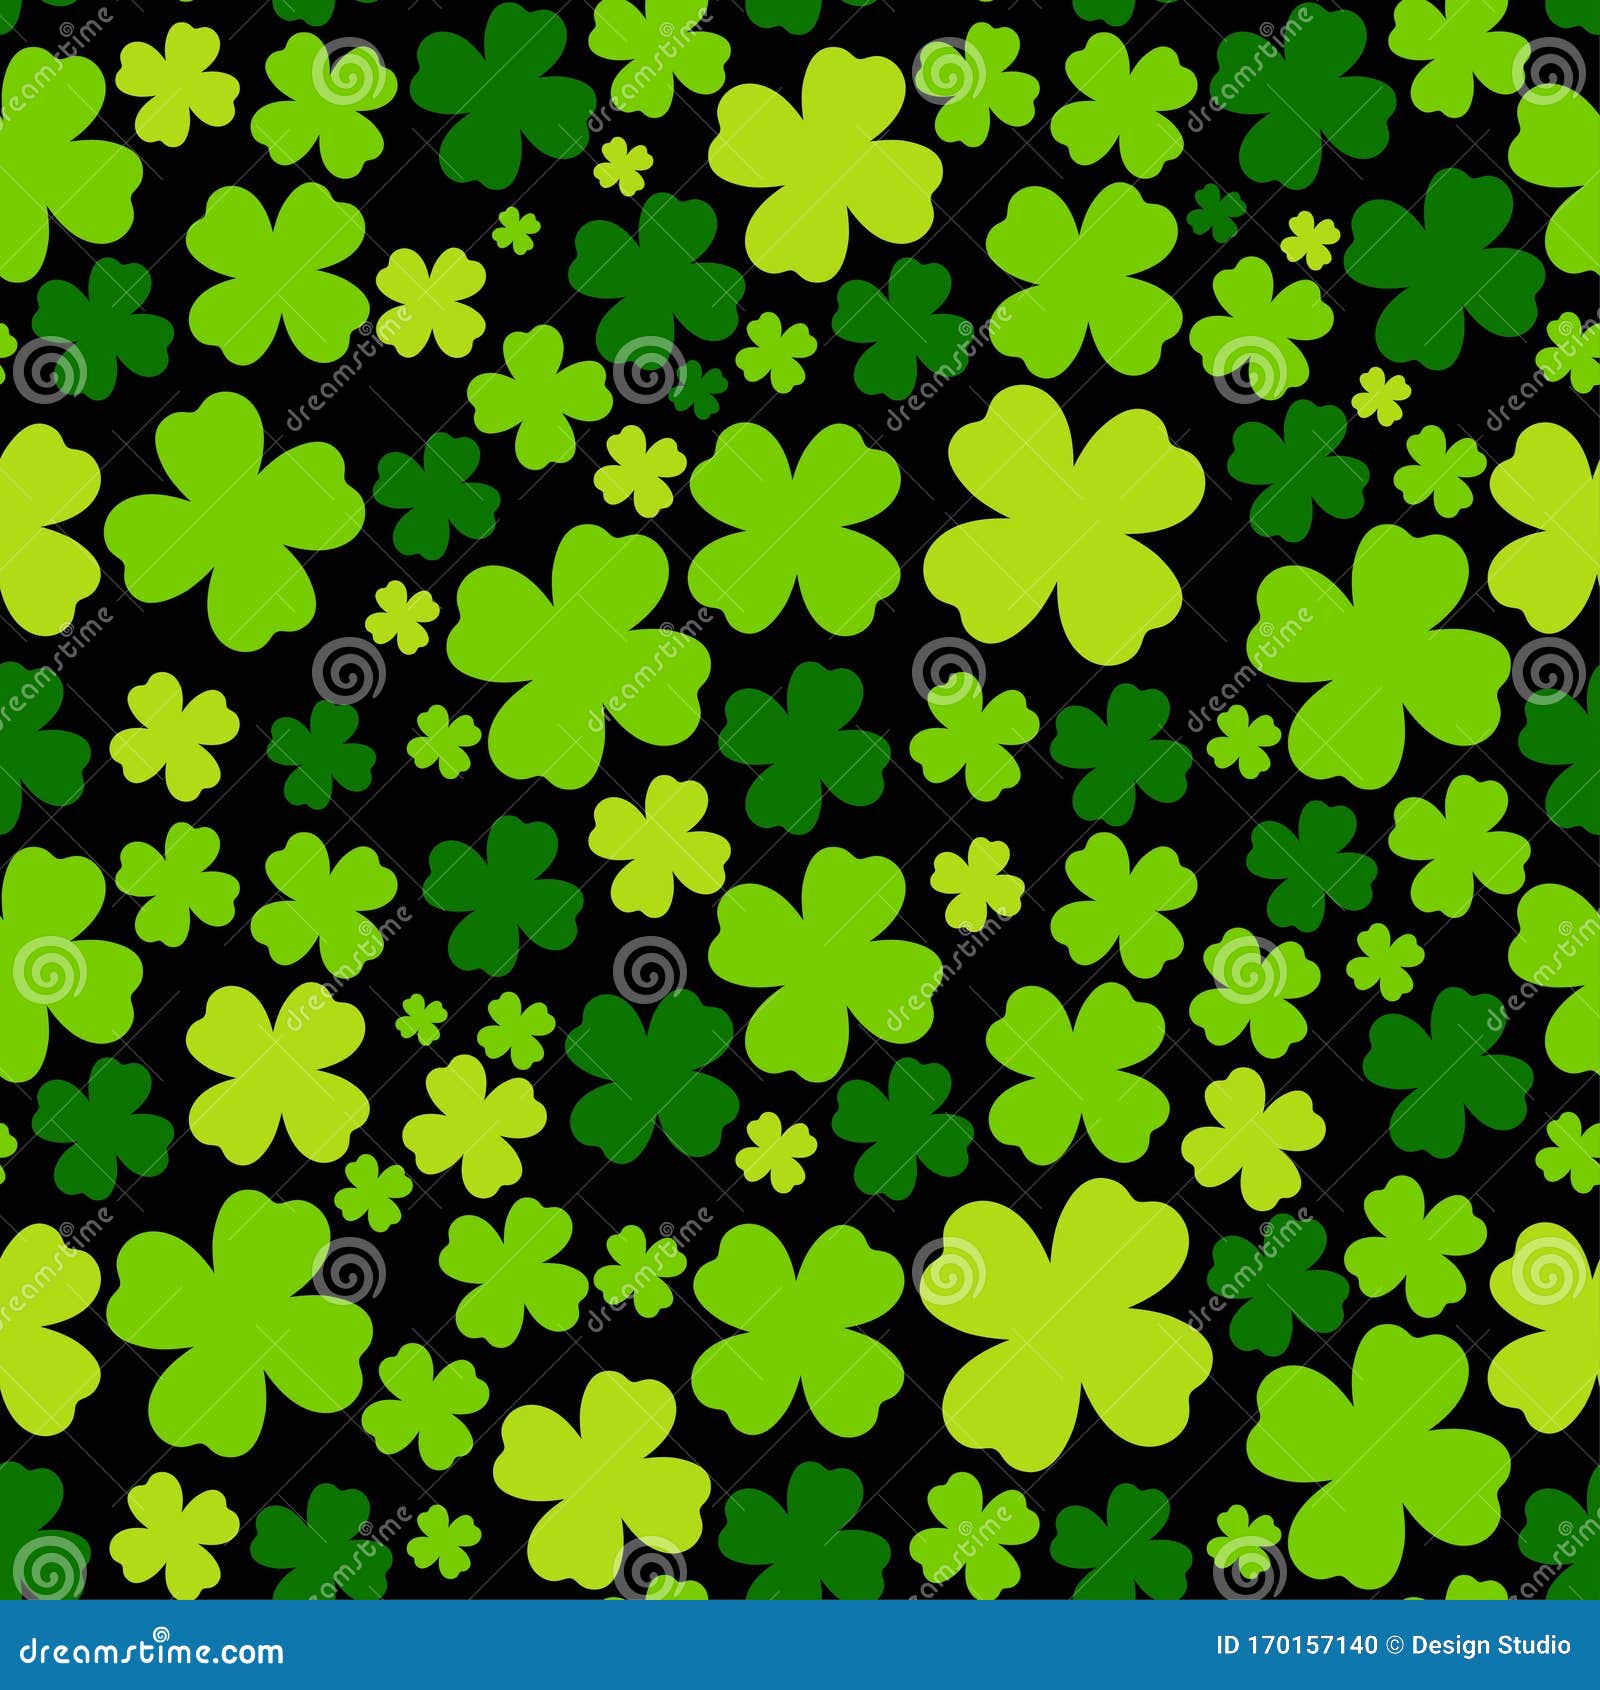 St Patricks Day Seamless Pattern. Green Background with Clover Leaves. Cute  Simple Repeated Design Stock Vector - Illustration of black, lucky:  170157140